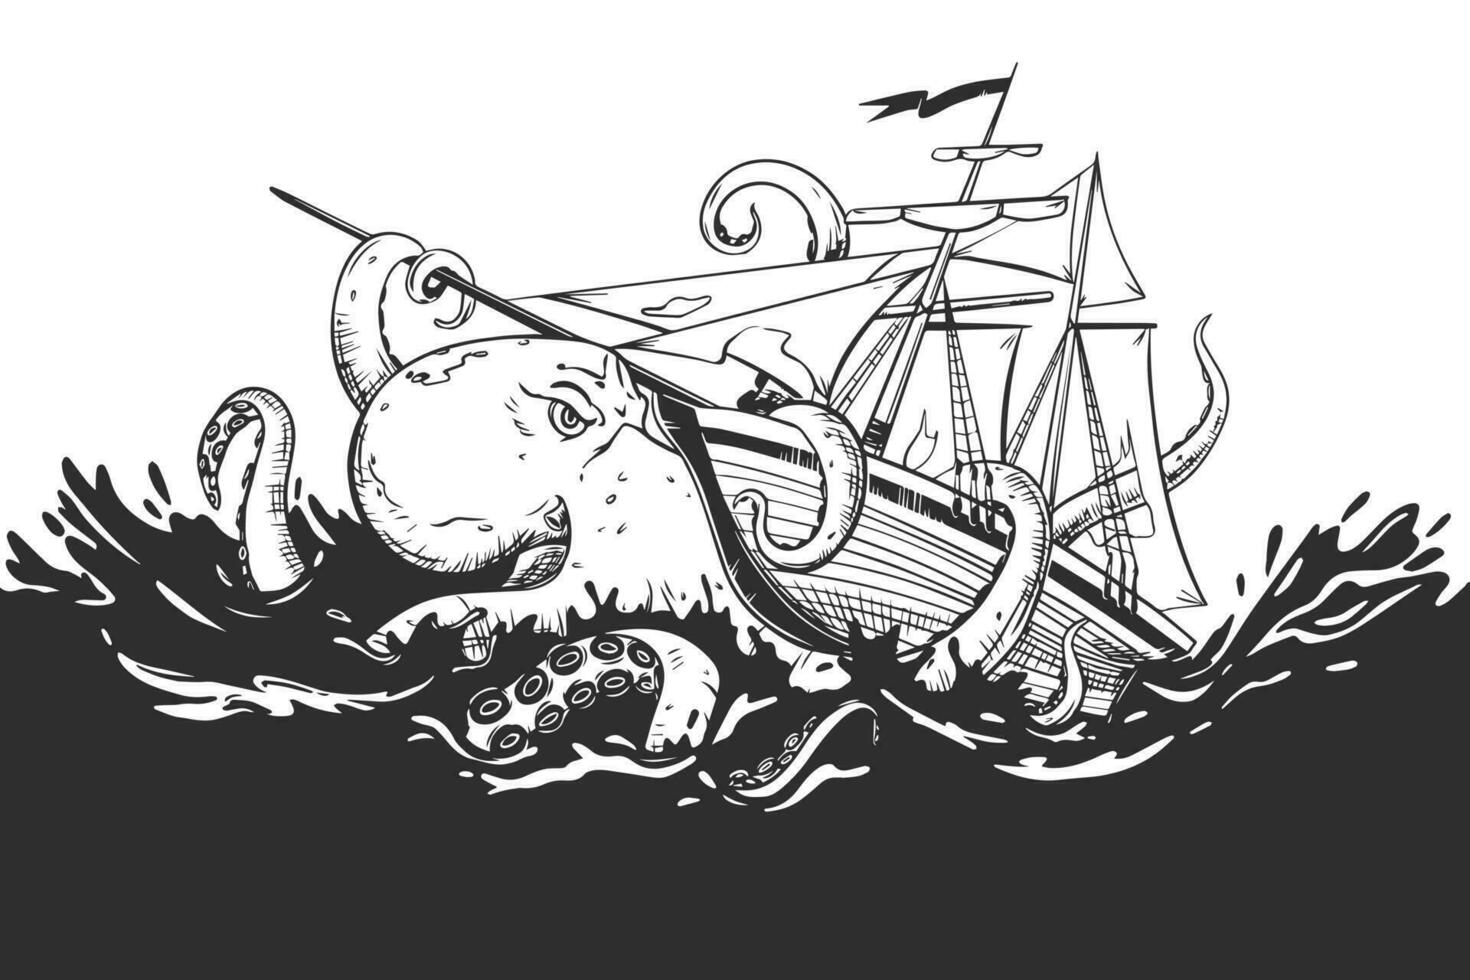 An enraged kraken attacks a commercial sailboat. Mythical monster from the dark depths. The octopus wraps its tentacles around the sailboat and pulls it to the bottom. Vector image.